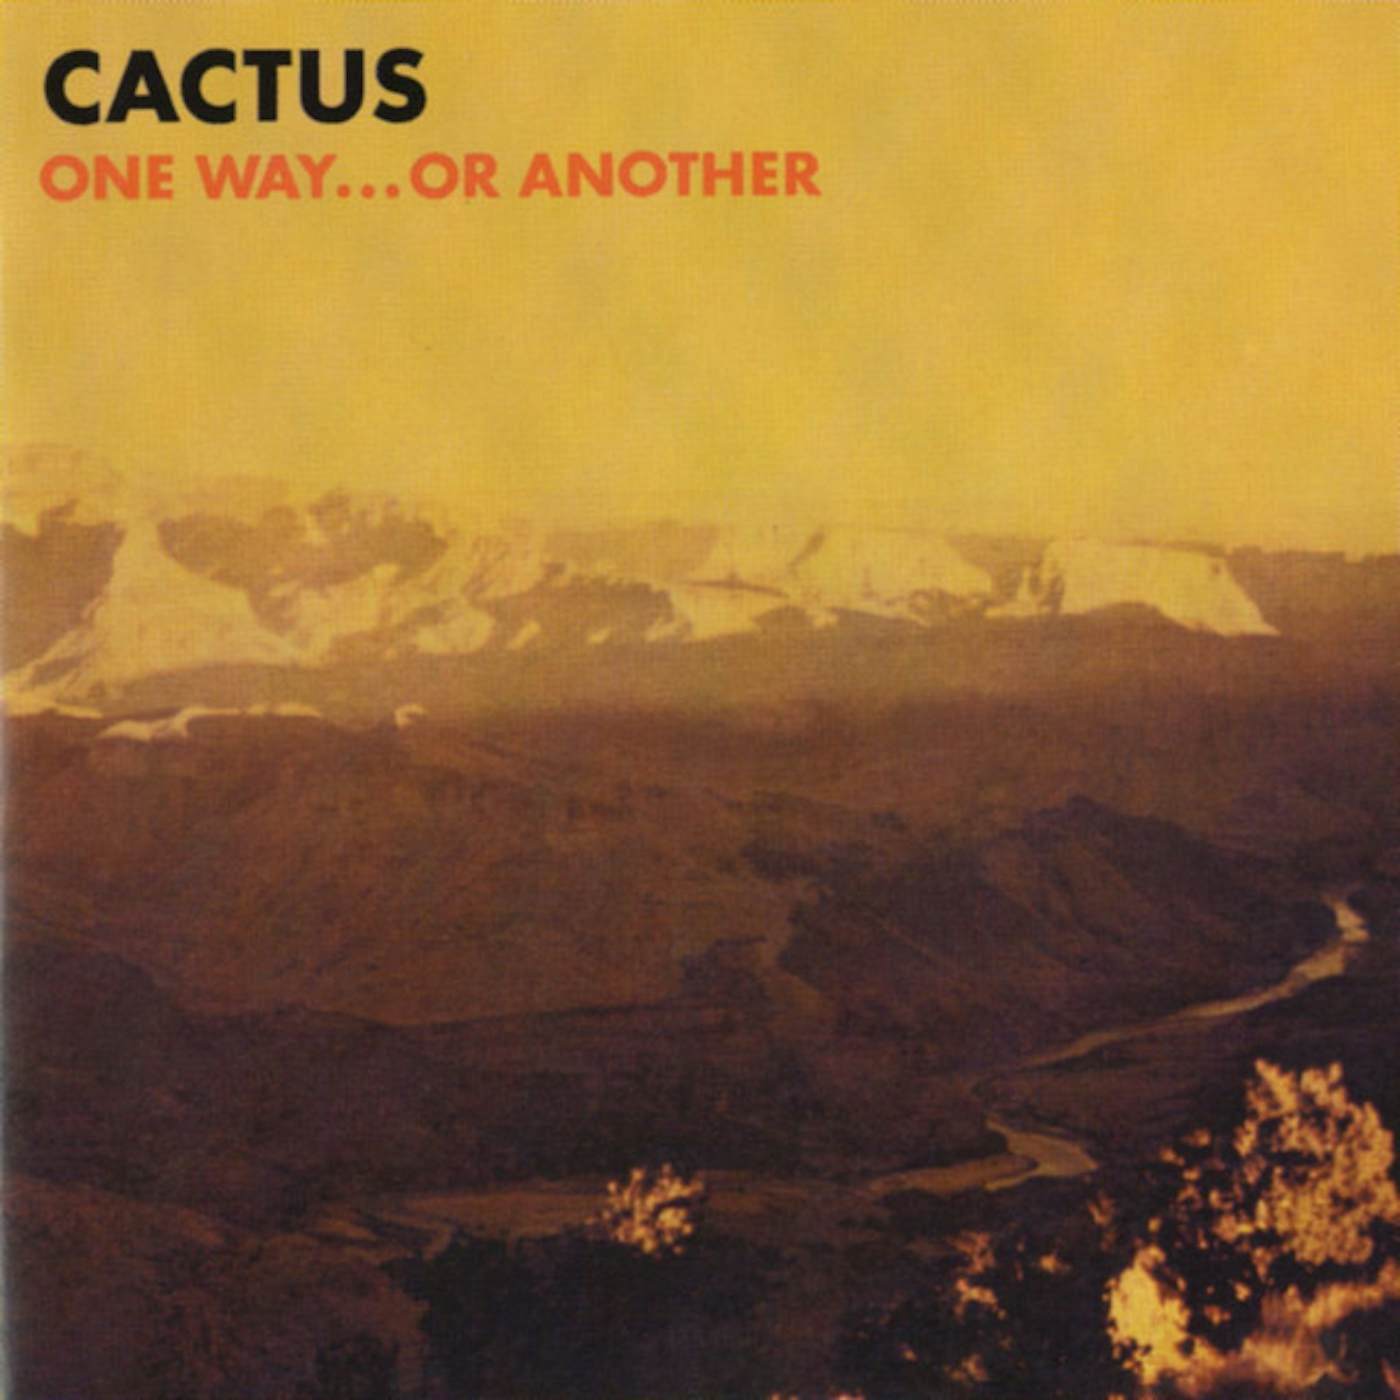 Cactus ONE WAY OR ANOTHER Vinyl Record